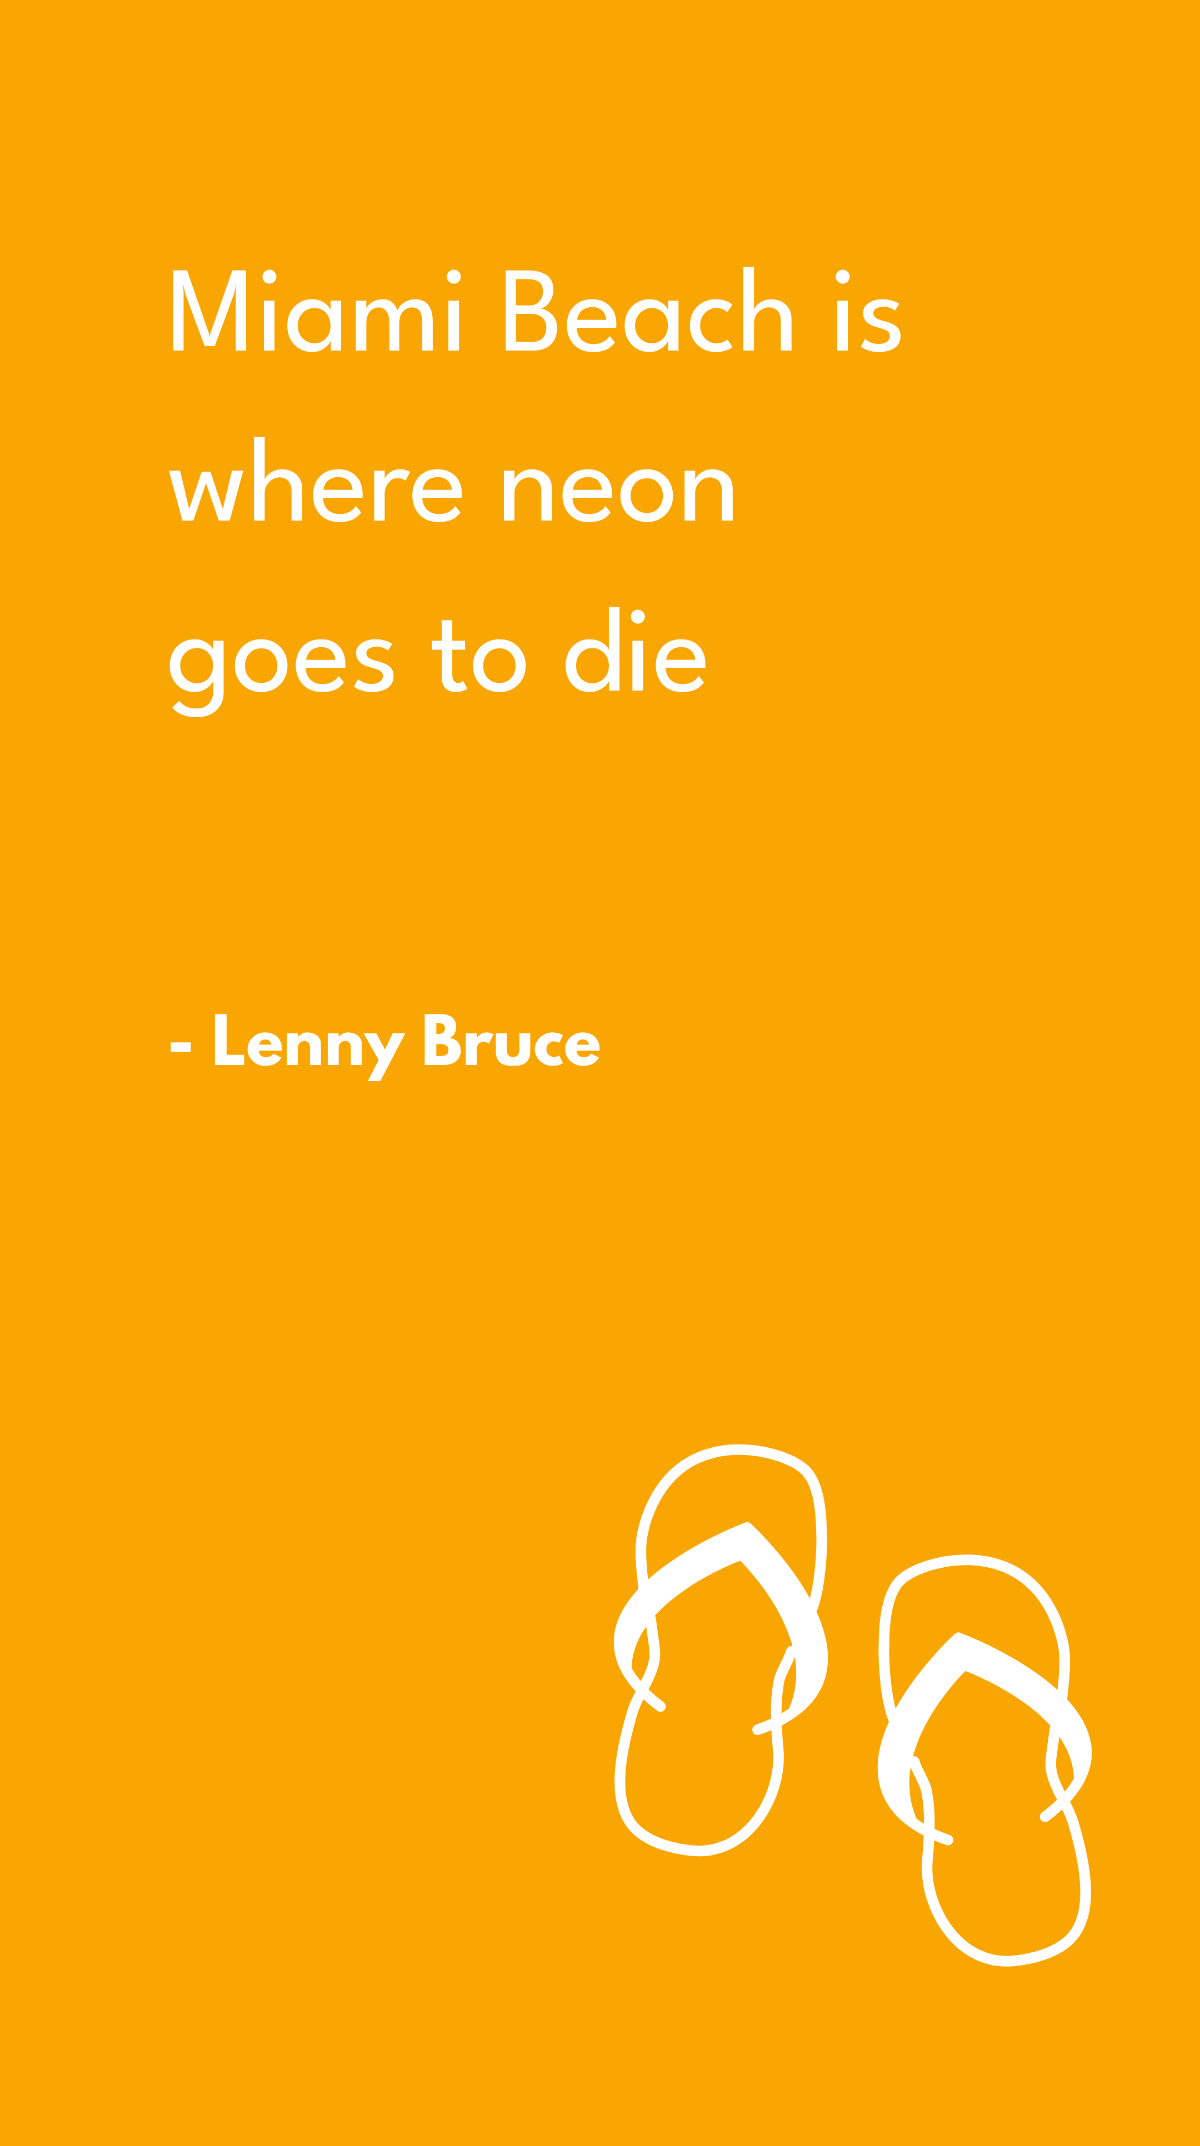 Lenny Bruce - Miami Beach is where neon goes to die